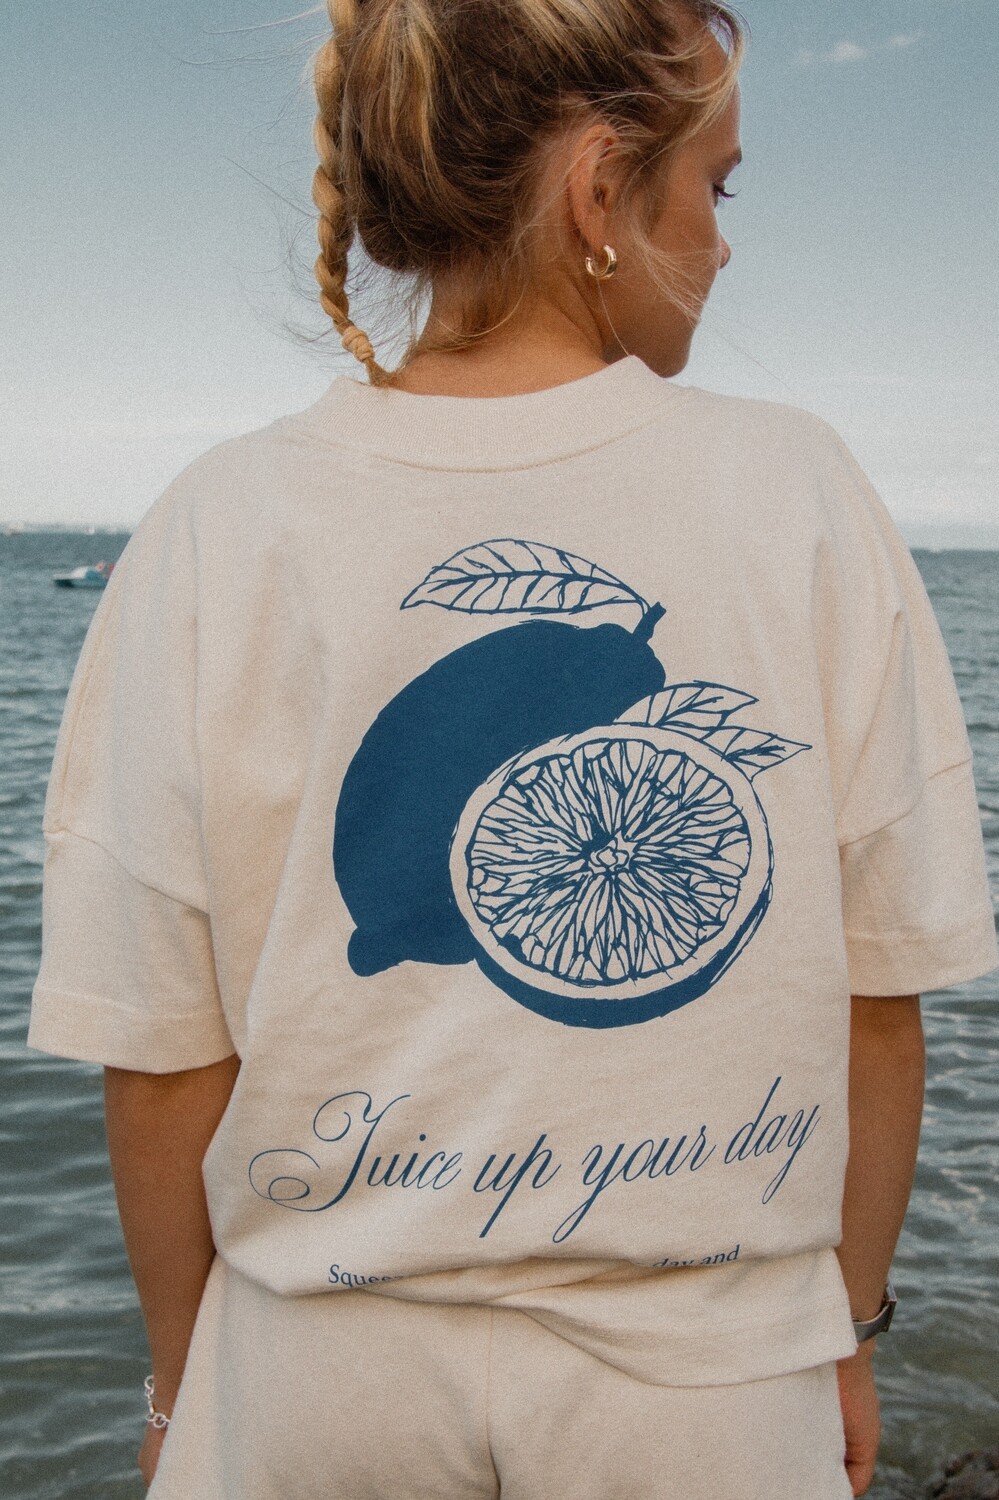 Juice up your day T-Shirt